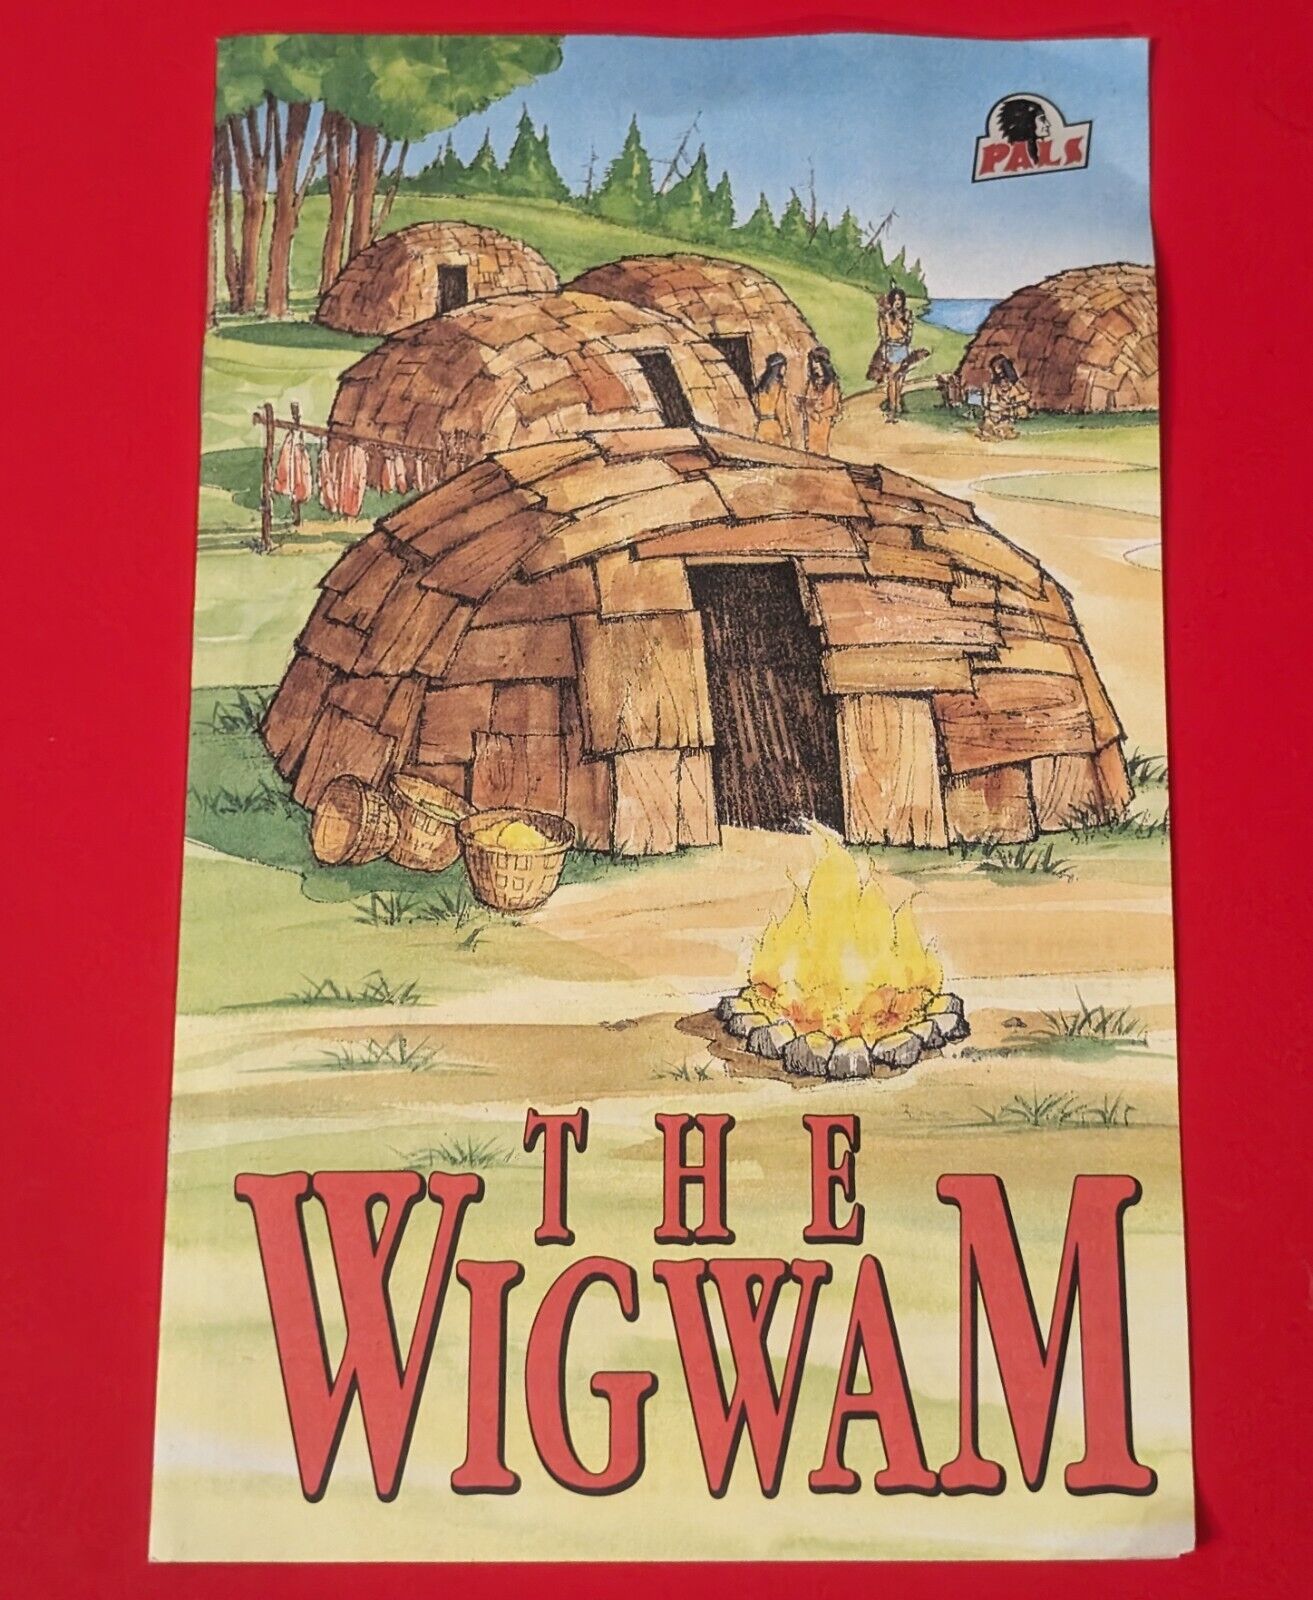 Vintage The Wigwam 1991 - Awana Pals Clubs Pamphlet Booklet Workbook Christian